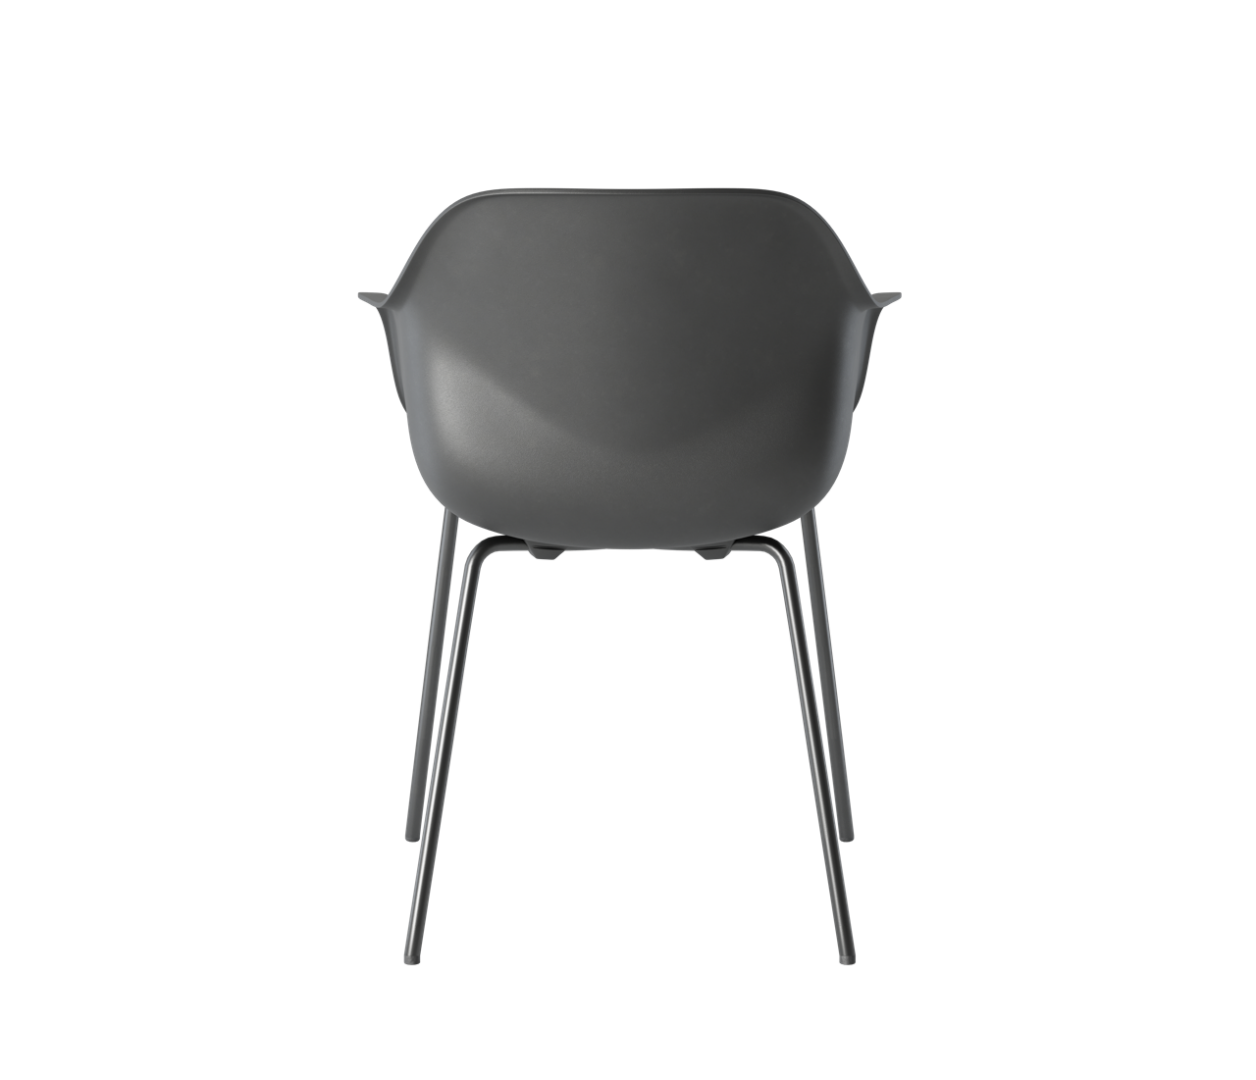 OCEE&FOUR – Chairs – FourMe 44 – Plastic Shell - Packshot Image 1 Large